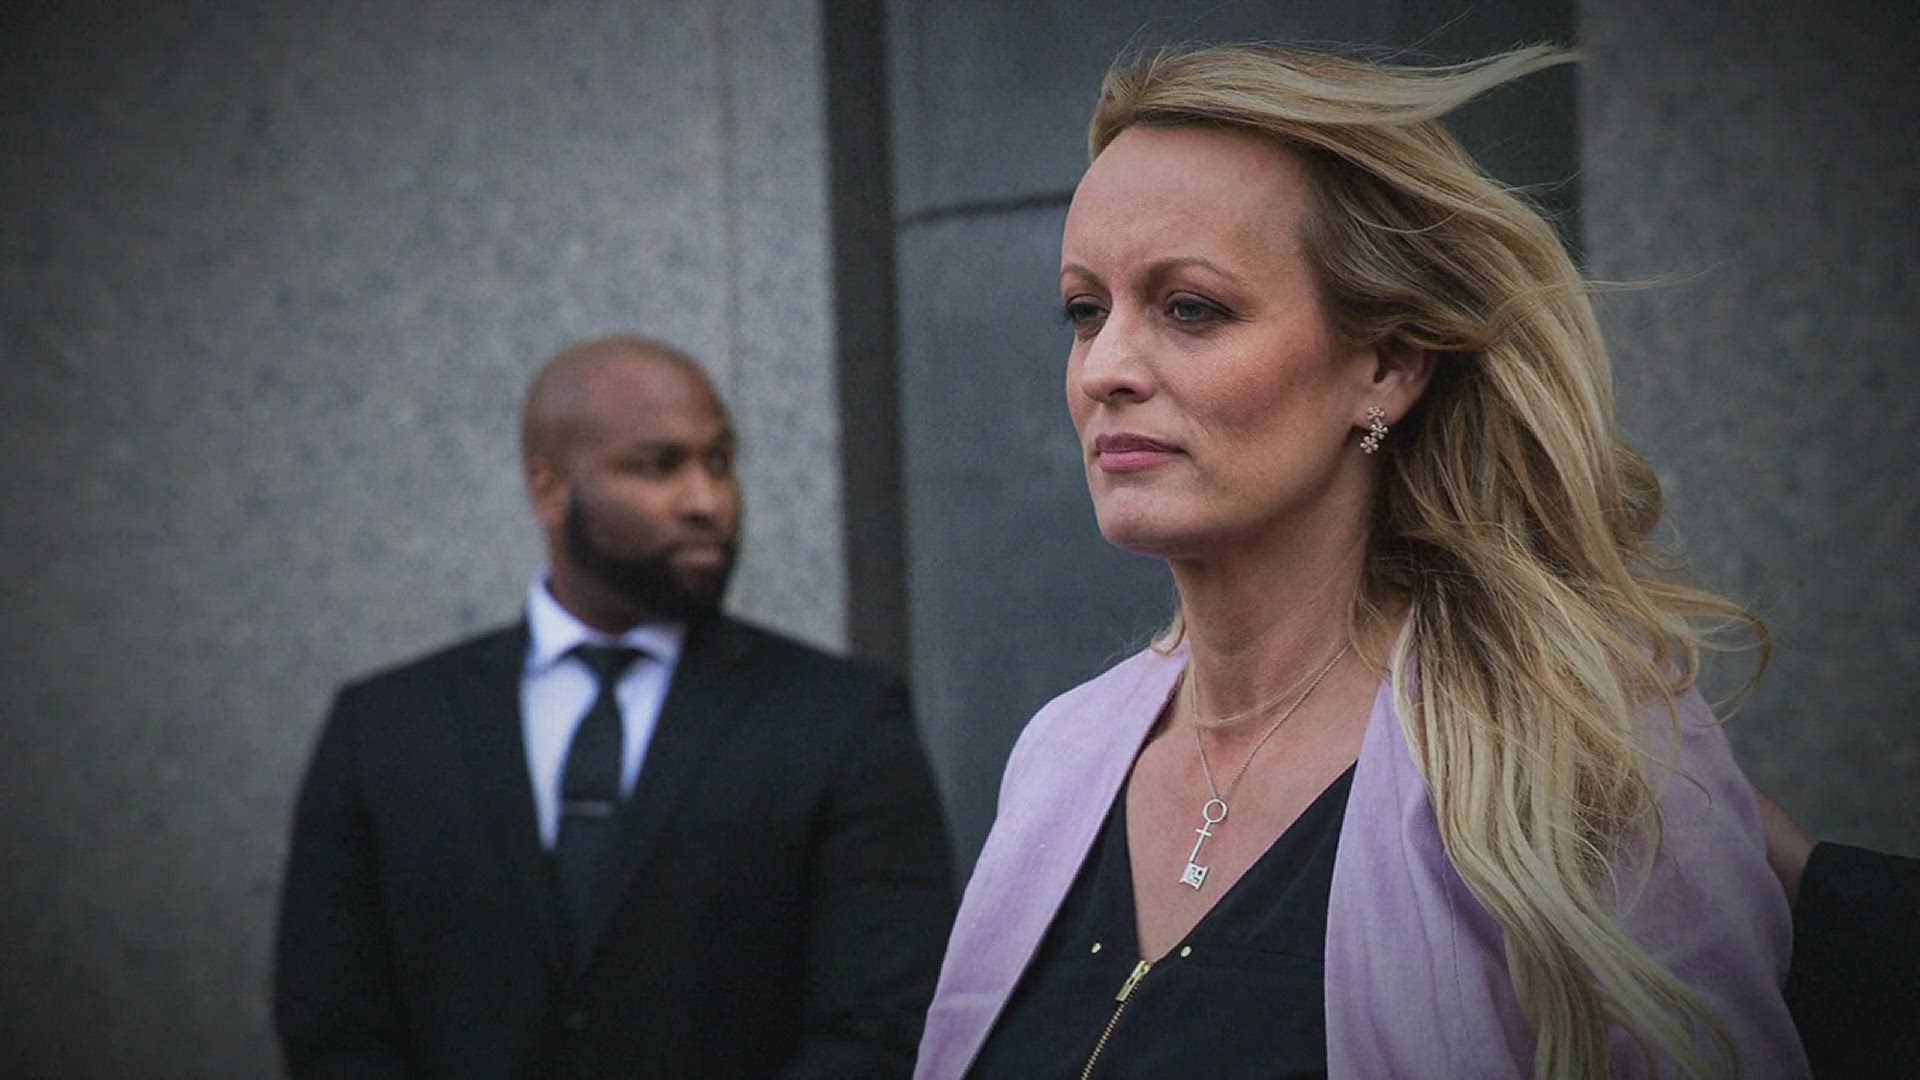 Adult actress Stormy Daniels's seven-hour-long testimony highlights more details about her encounter with the former president back in 2006.